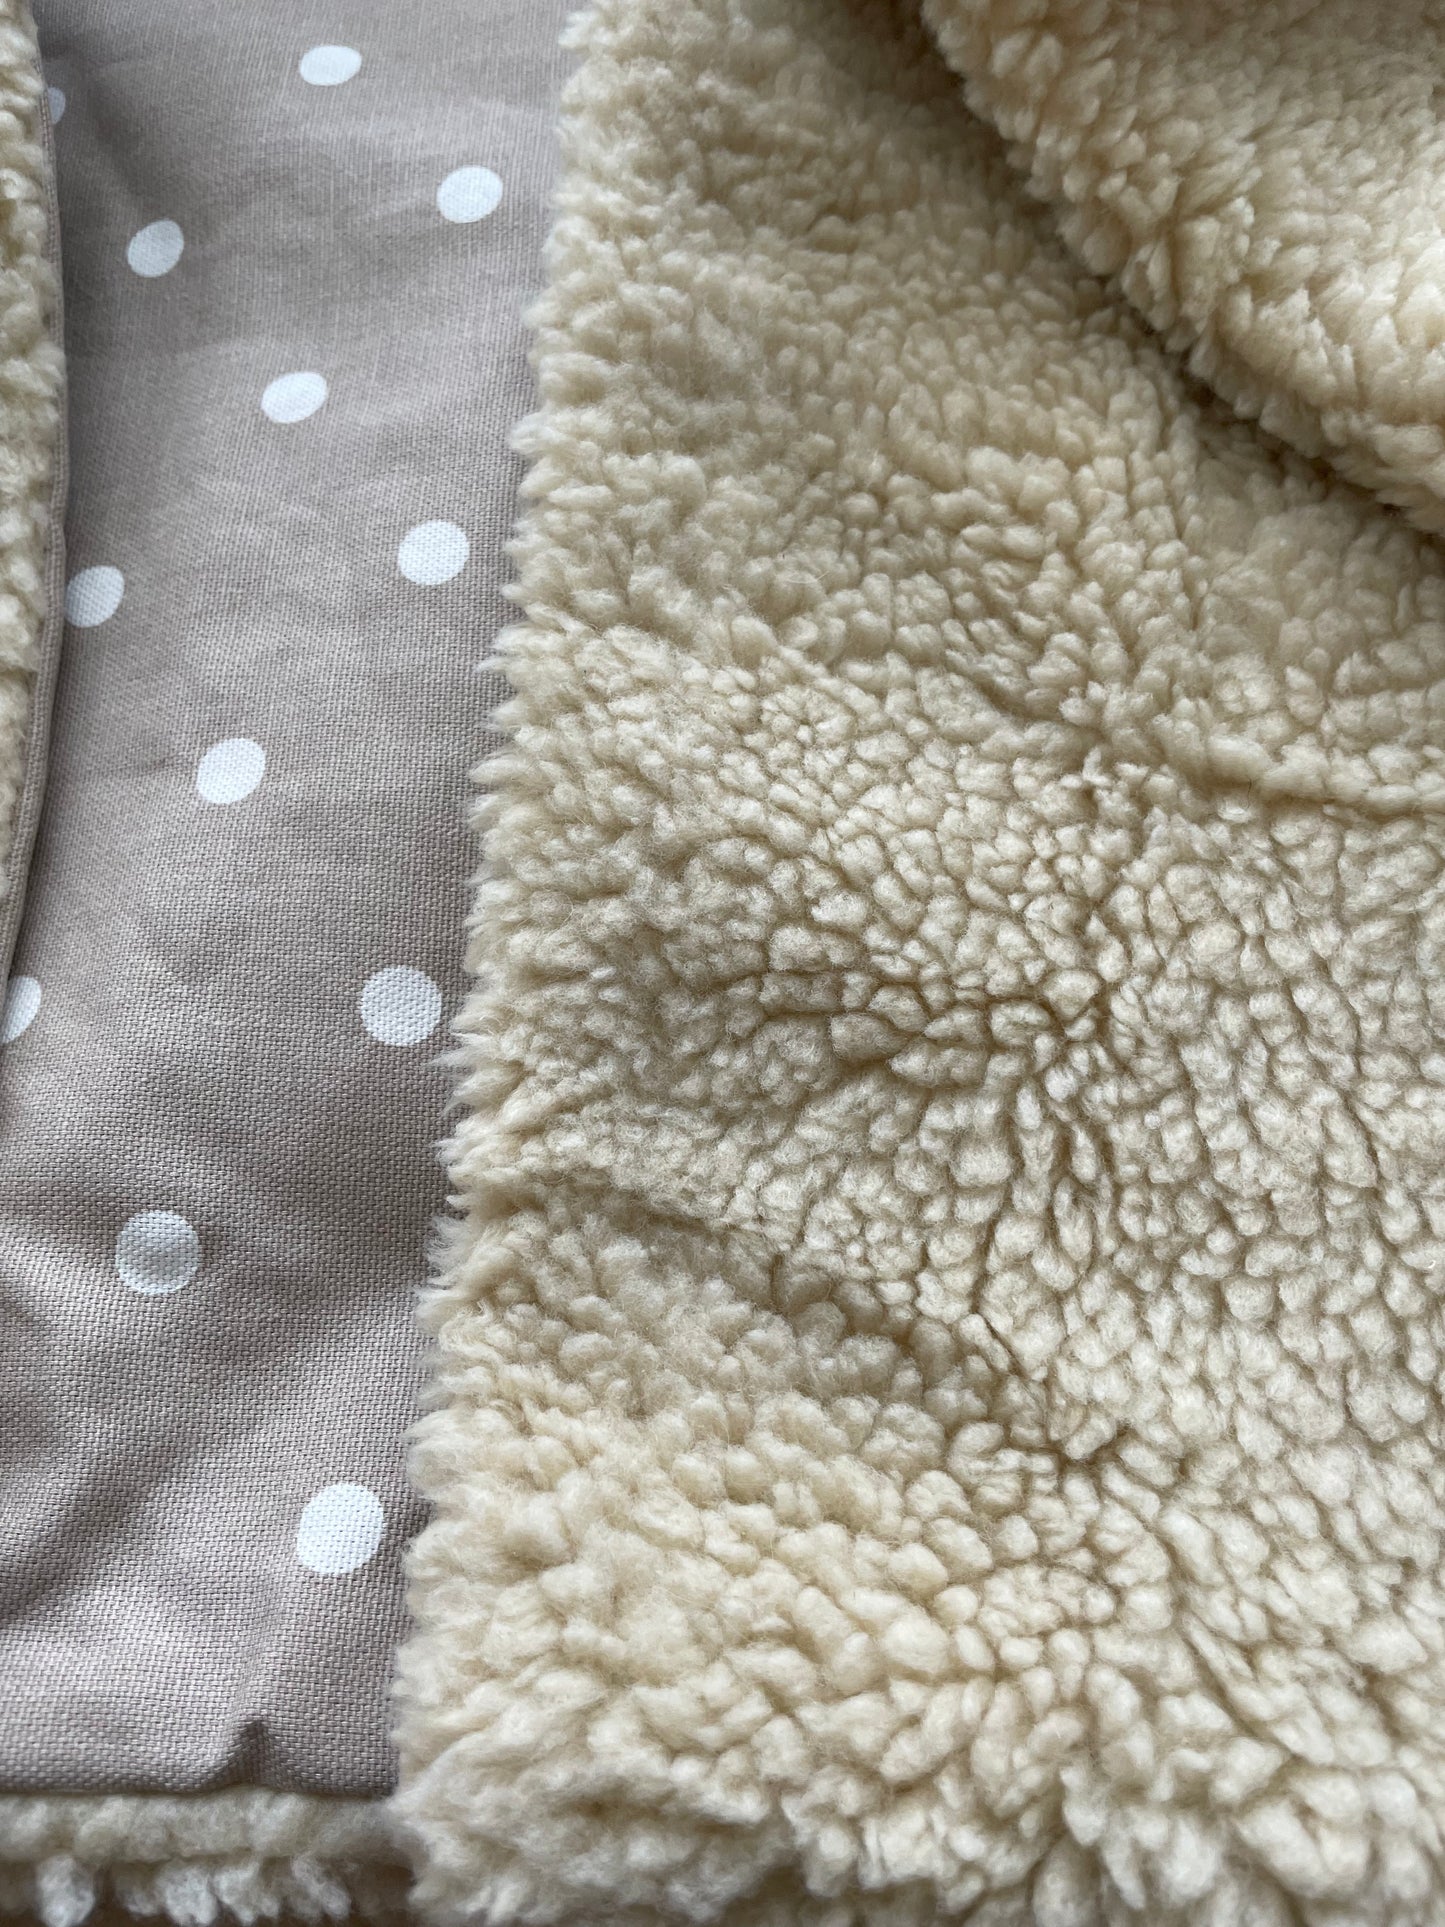 Taupe Spotty Dog/Cat/Pet Blanket with lambswool sherpa backing